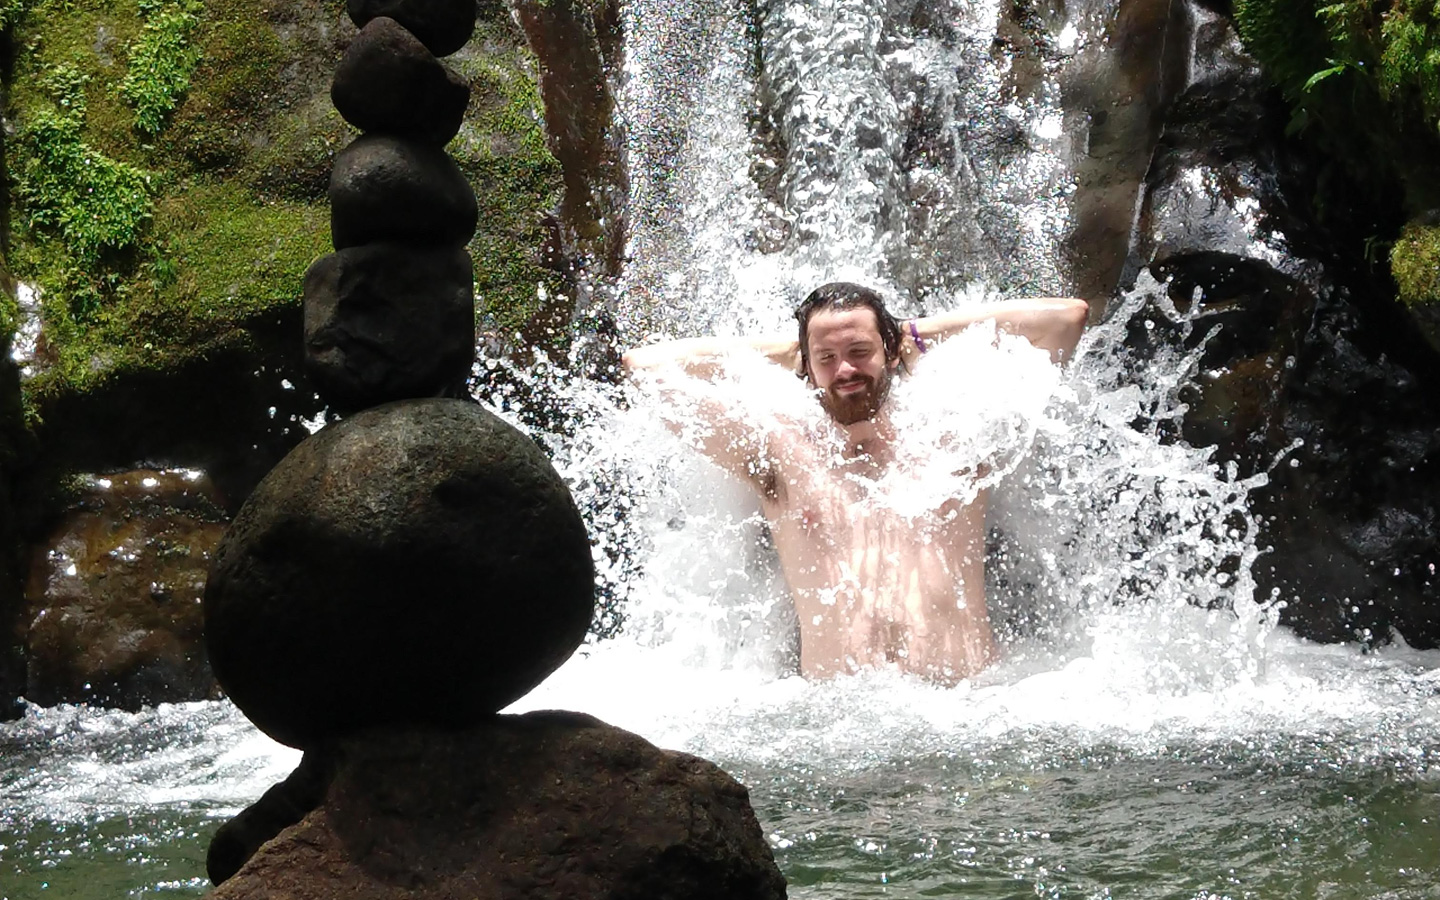 A Spanish student enjoying the cold water of a waterfall during a weekend excursion to Mindo